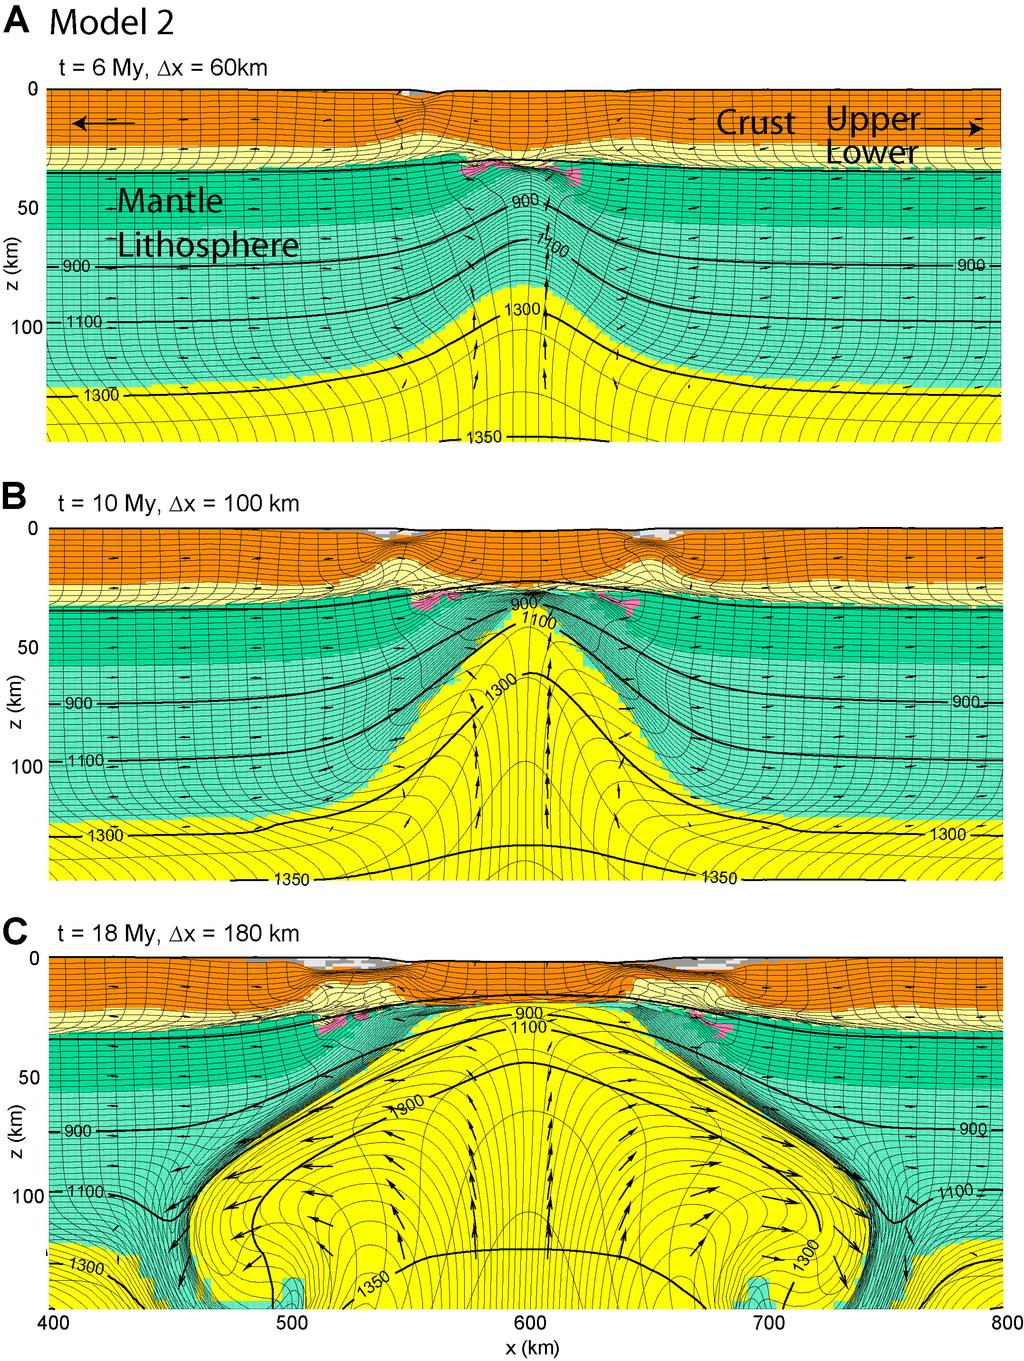 DR2008039 Huismans and Beaumont 8 Figure DR6. Model 2 Weak Mantle Lithosphere. A, B, Phase 1, wide crustal rifting and narrow mantle lithosphere necking.